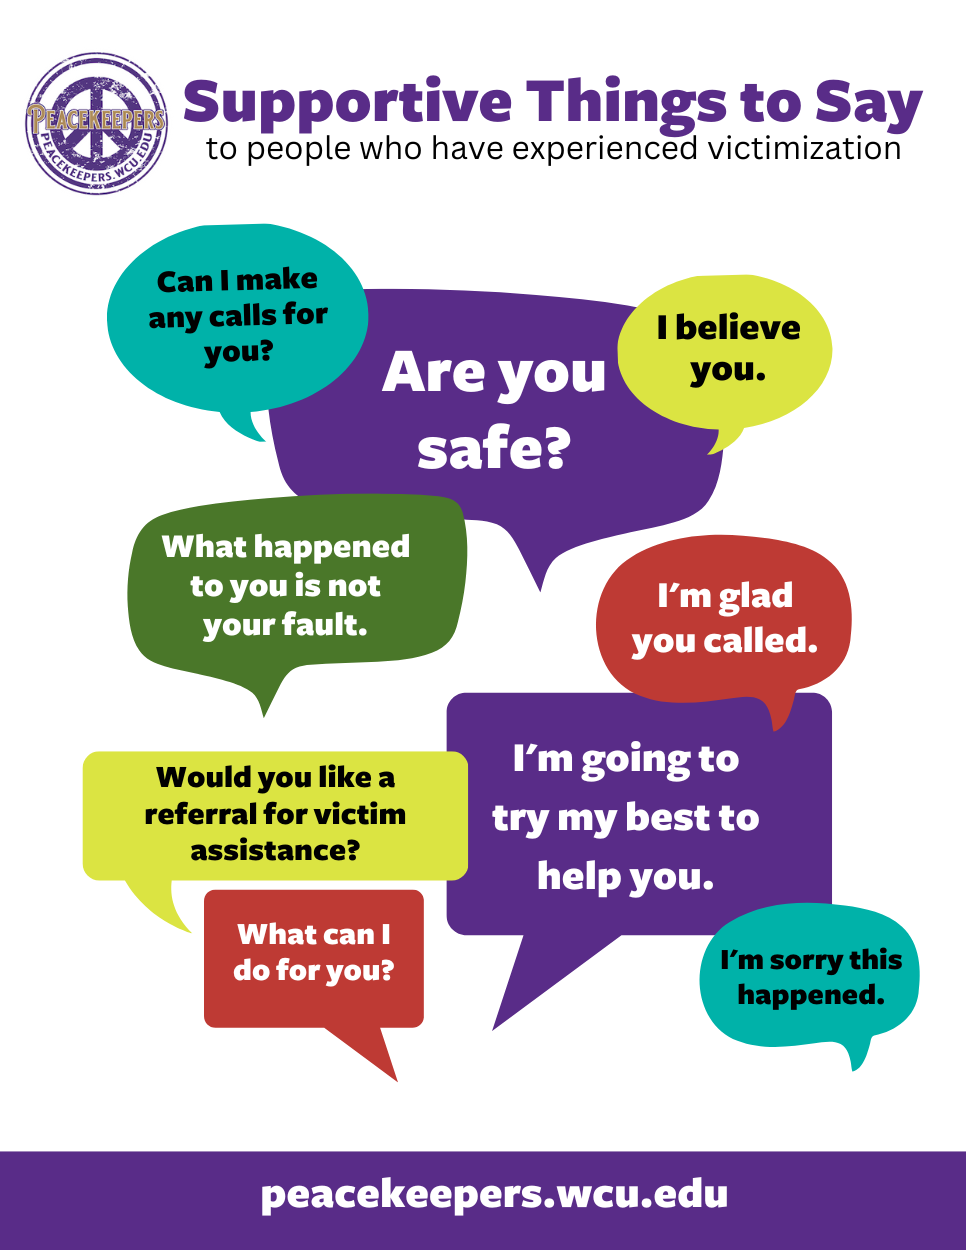 A thumbnail image of a flyer with "Supportive things to say to people who have experienced victimization" at the top